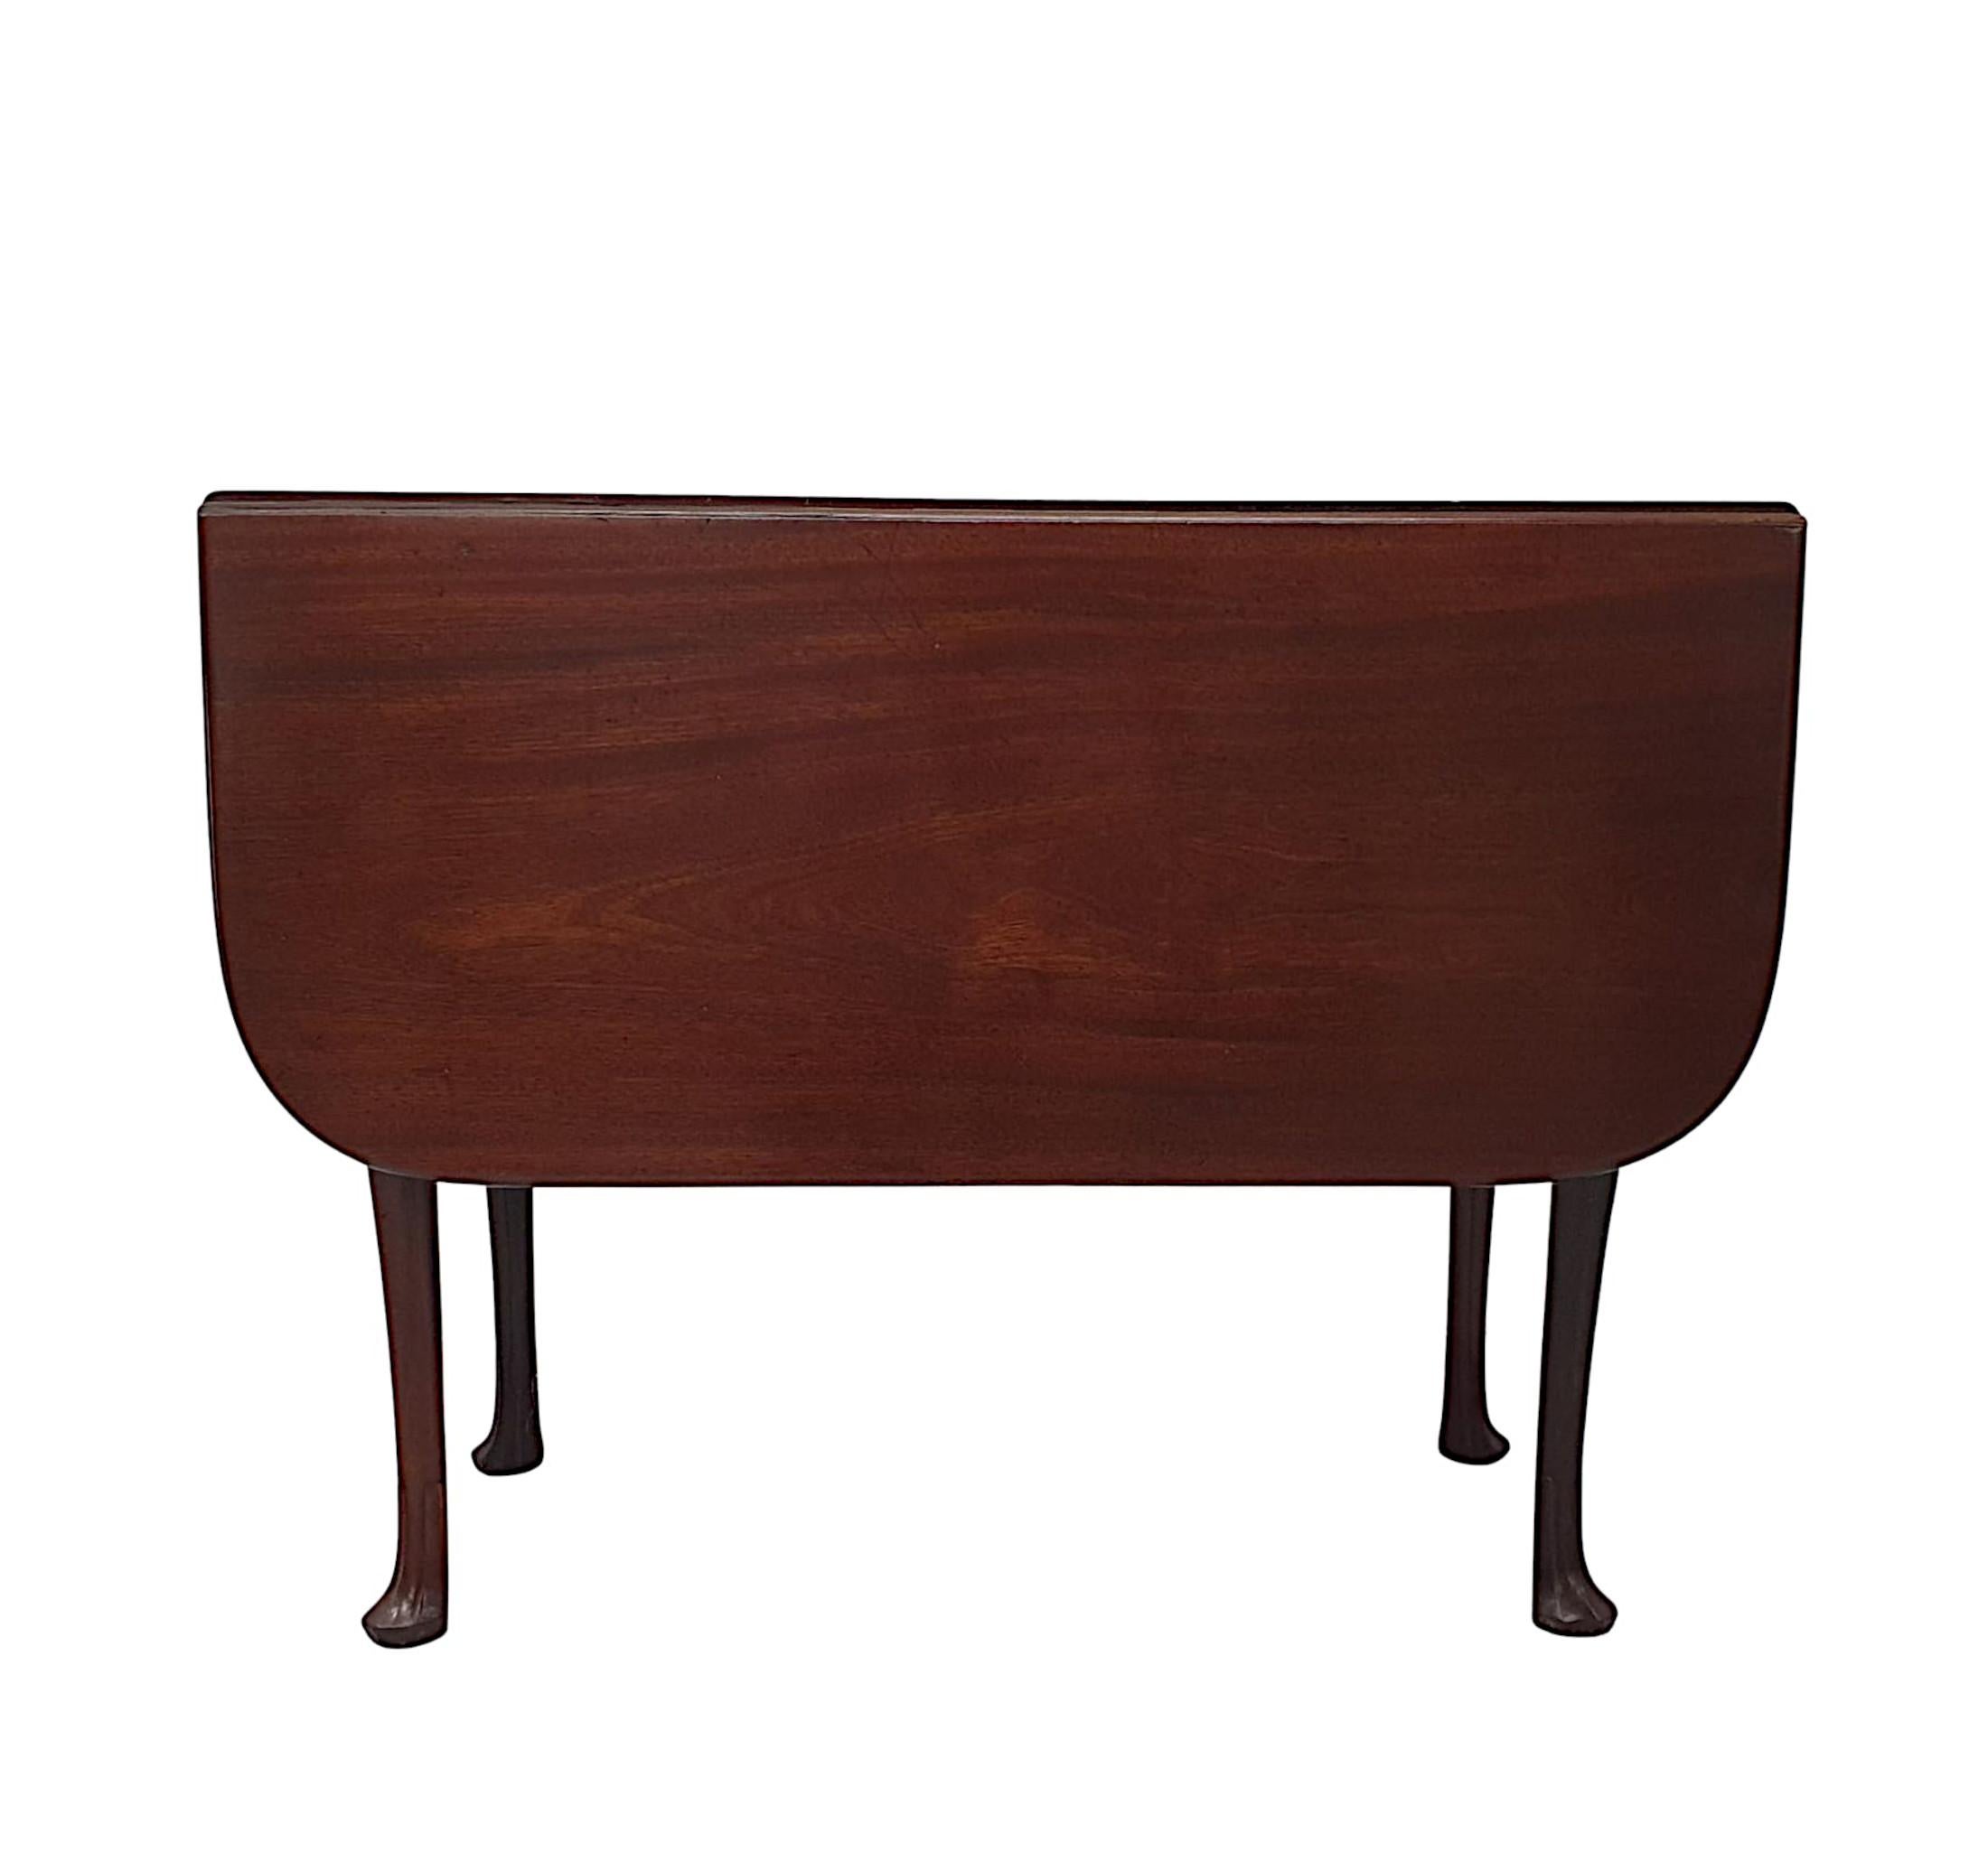 A fabulous quality Georgian Irish mahogany drop leaf table with rich patination and grain. The attractive, well figured, shaped and moulded top of rectangular form with two twin hinged drop leaves to either side raised over a simple and shaped